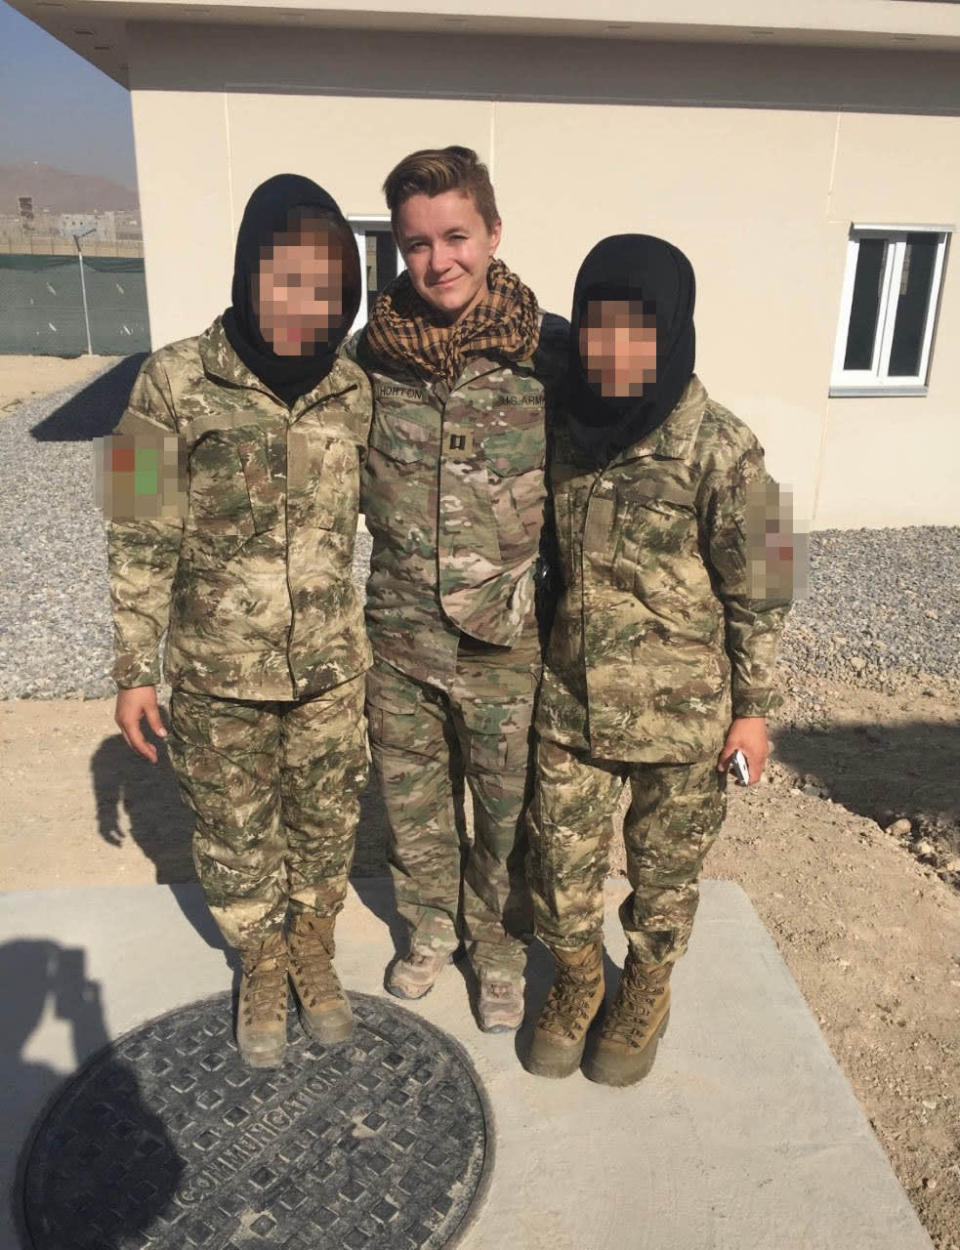 <div class="inline-image__caption"><p>Former Army Capt. Alex Horton says she hopes women soliders in Afghanistan either get out or use their training to fight back.</p></div> <div class="inline-image__credit">Courtesy Alex Horton</div>